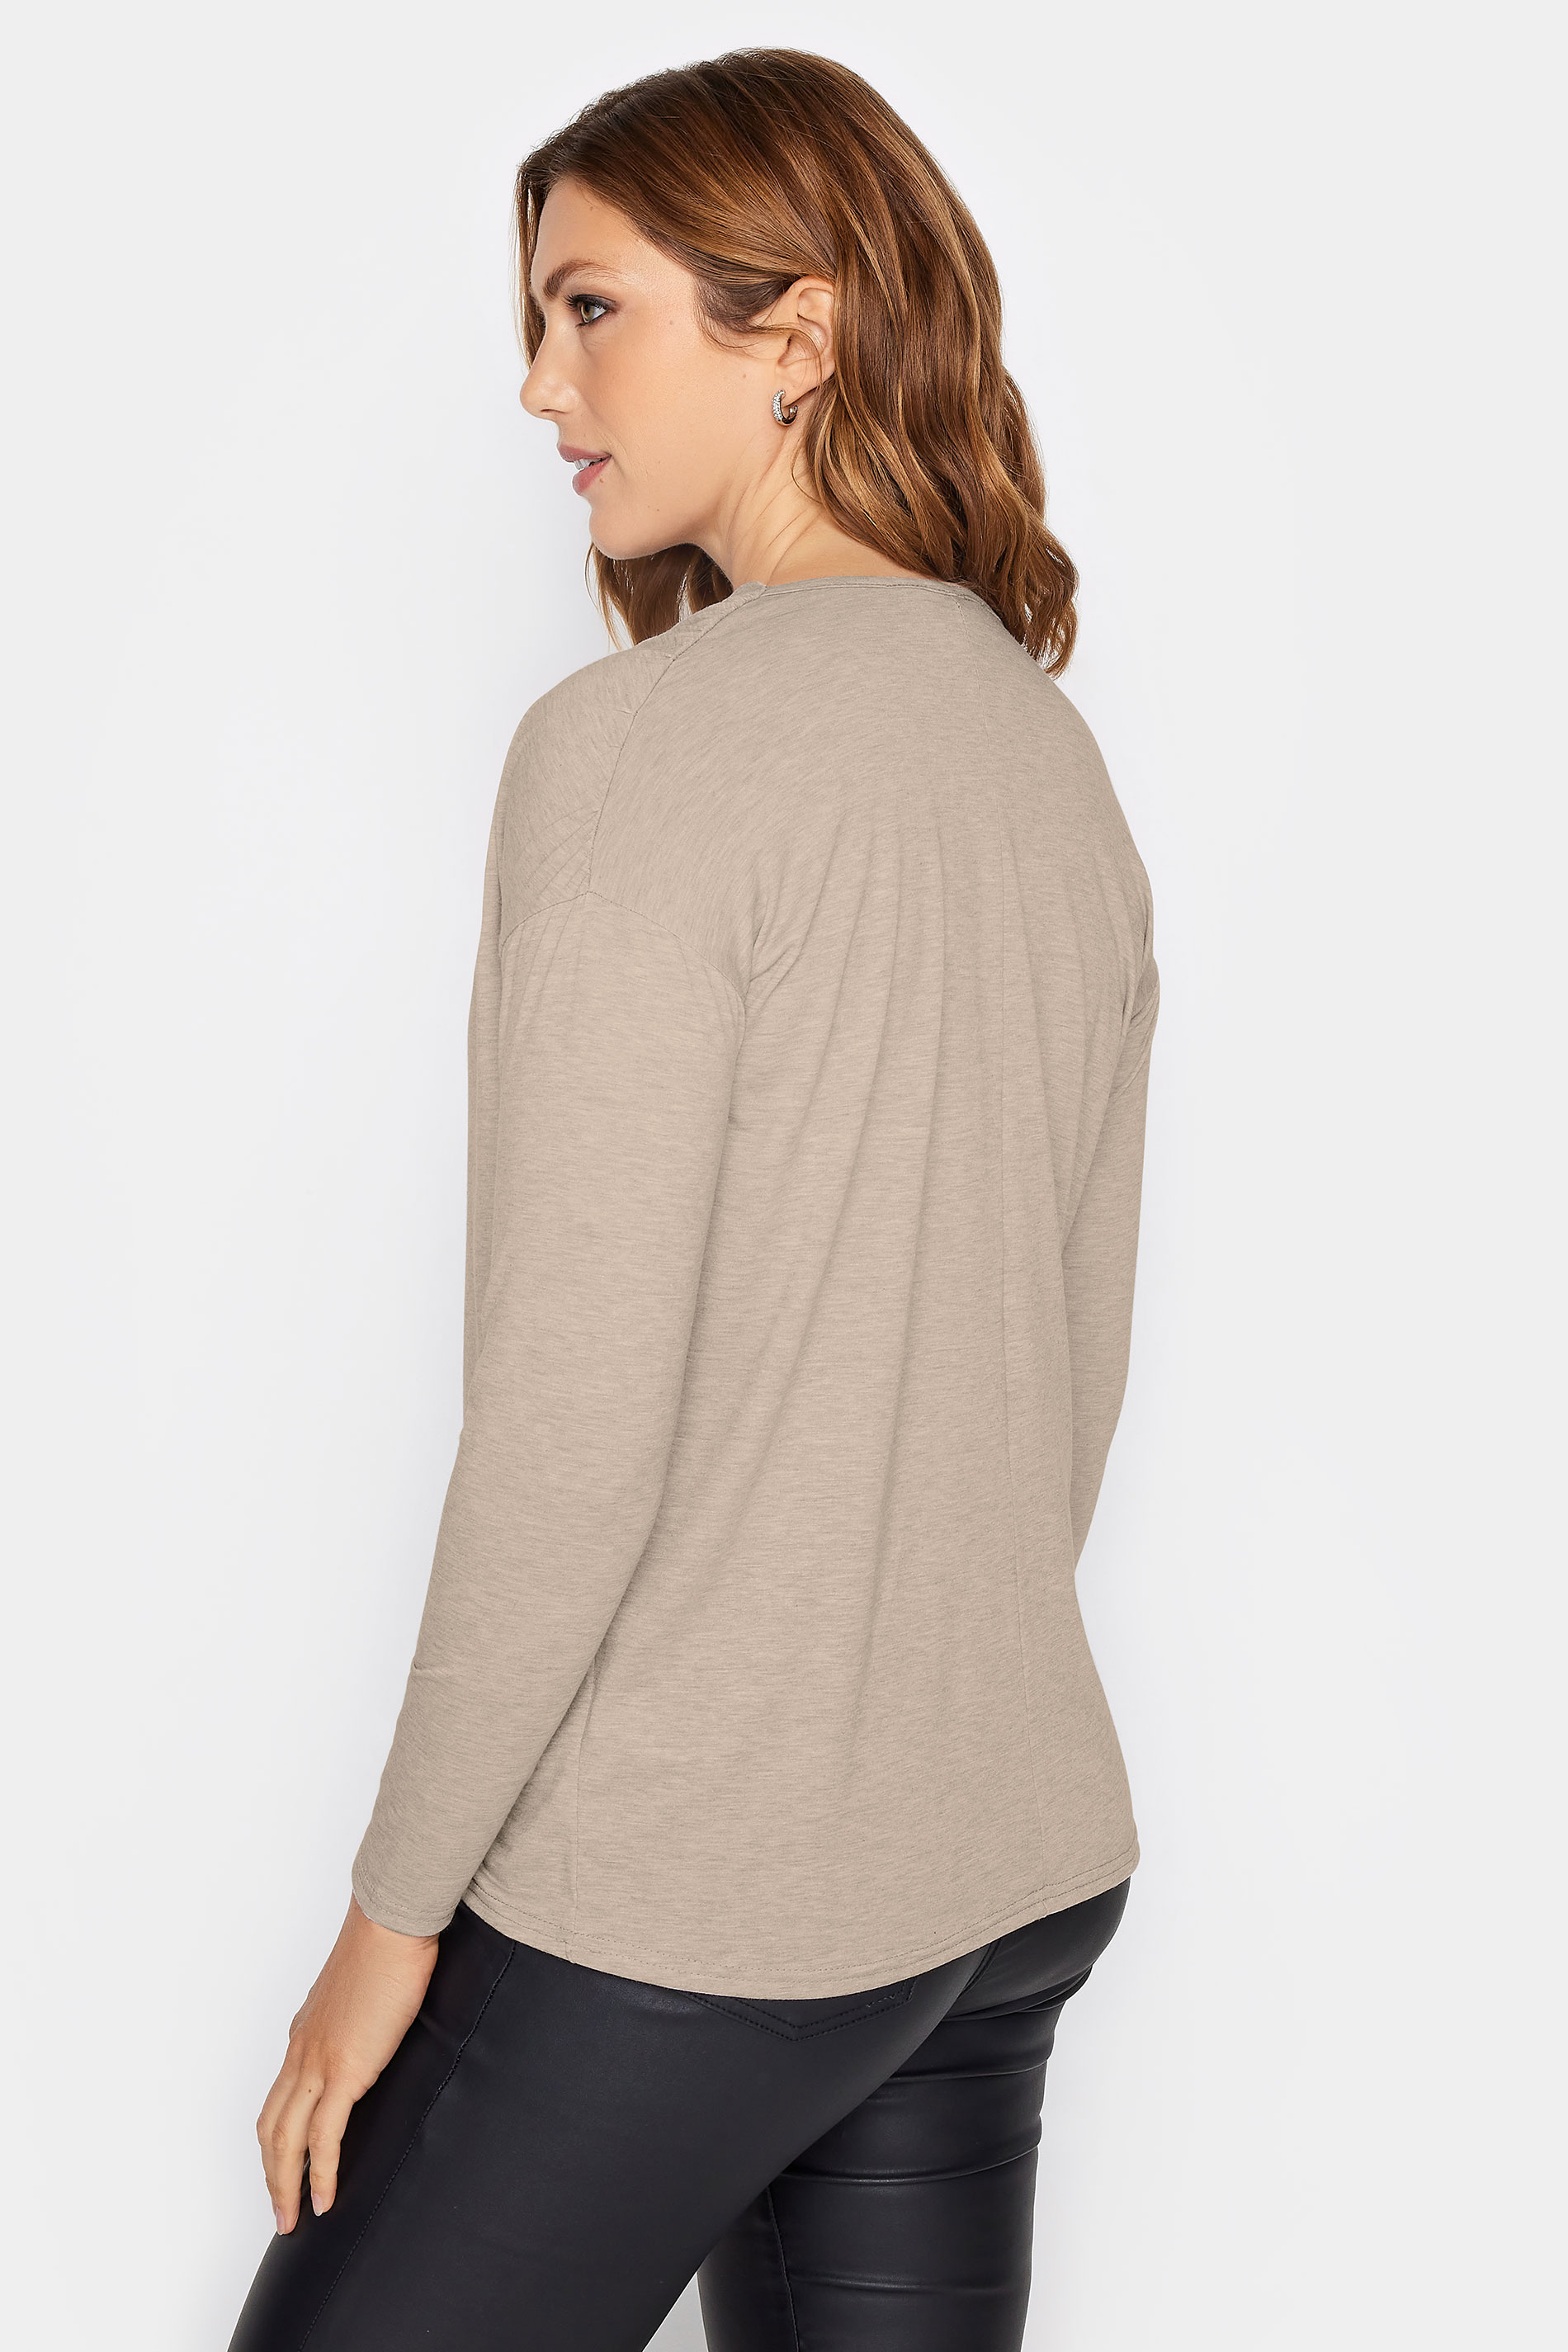 LTS Tall Oatmeal Cream Ruched Neck Top | Long Tall Sally 3